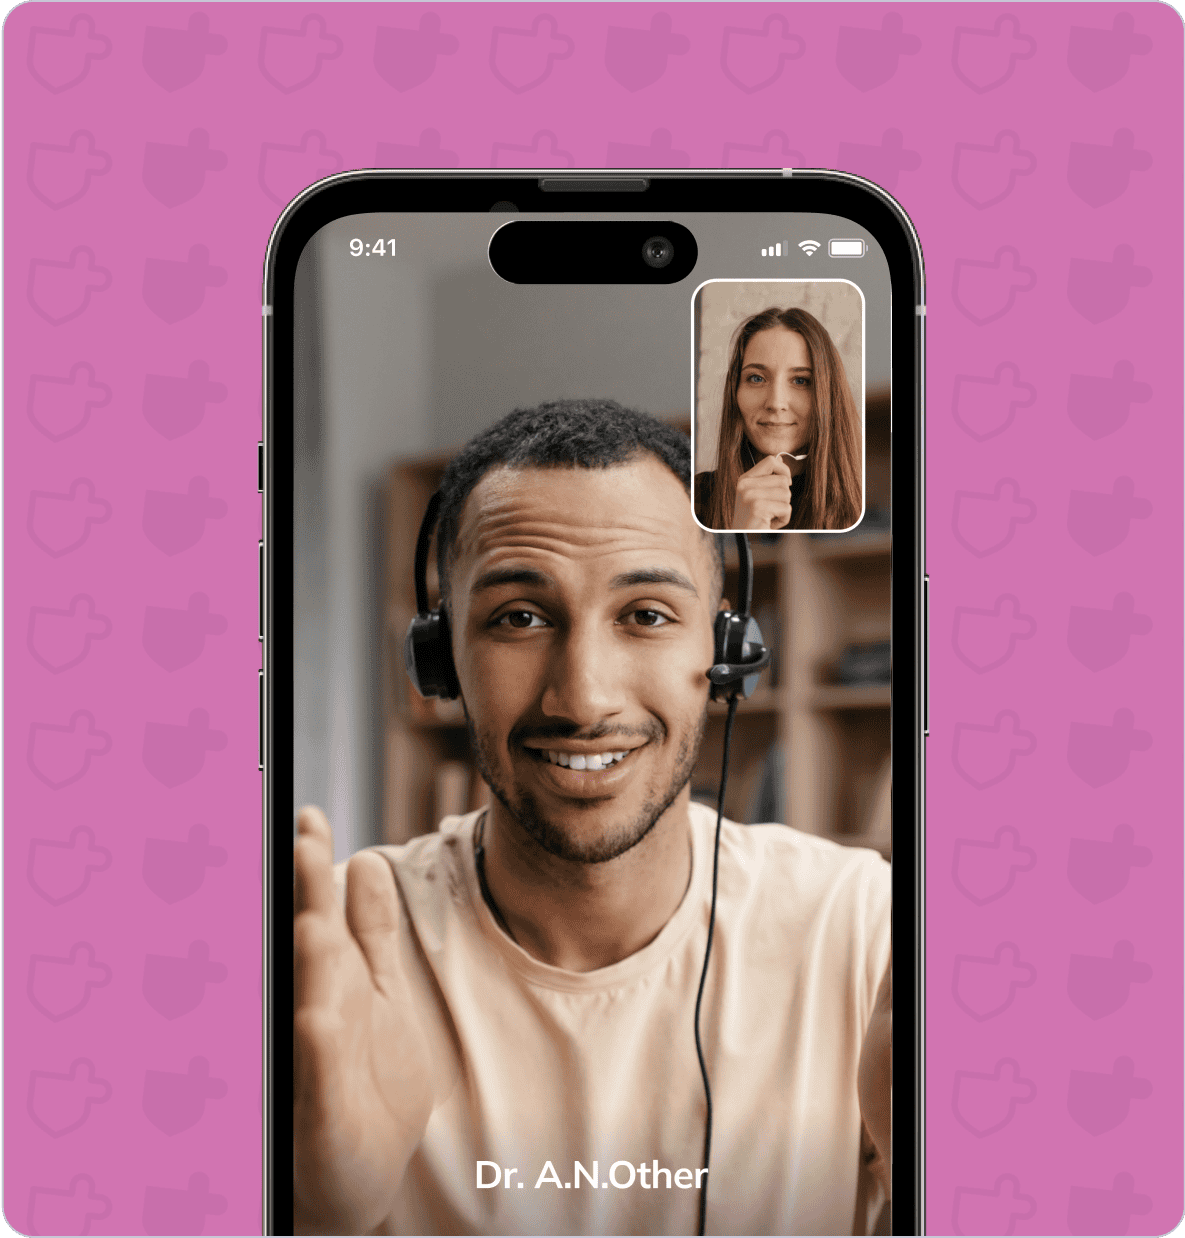 A man wearing headphones is video chatting with a woman on a smartphone screen.